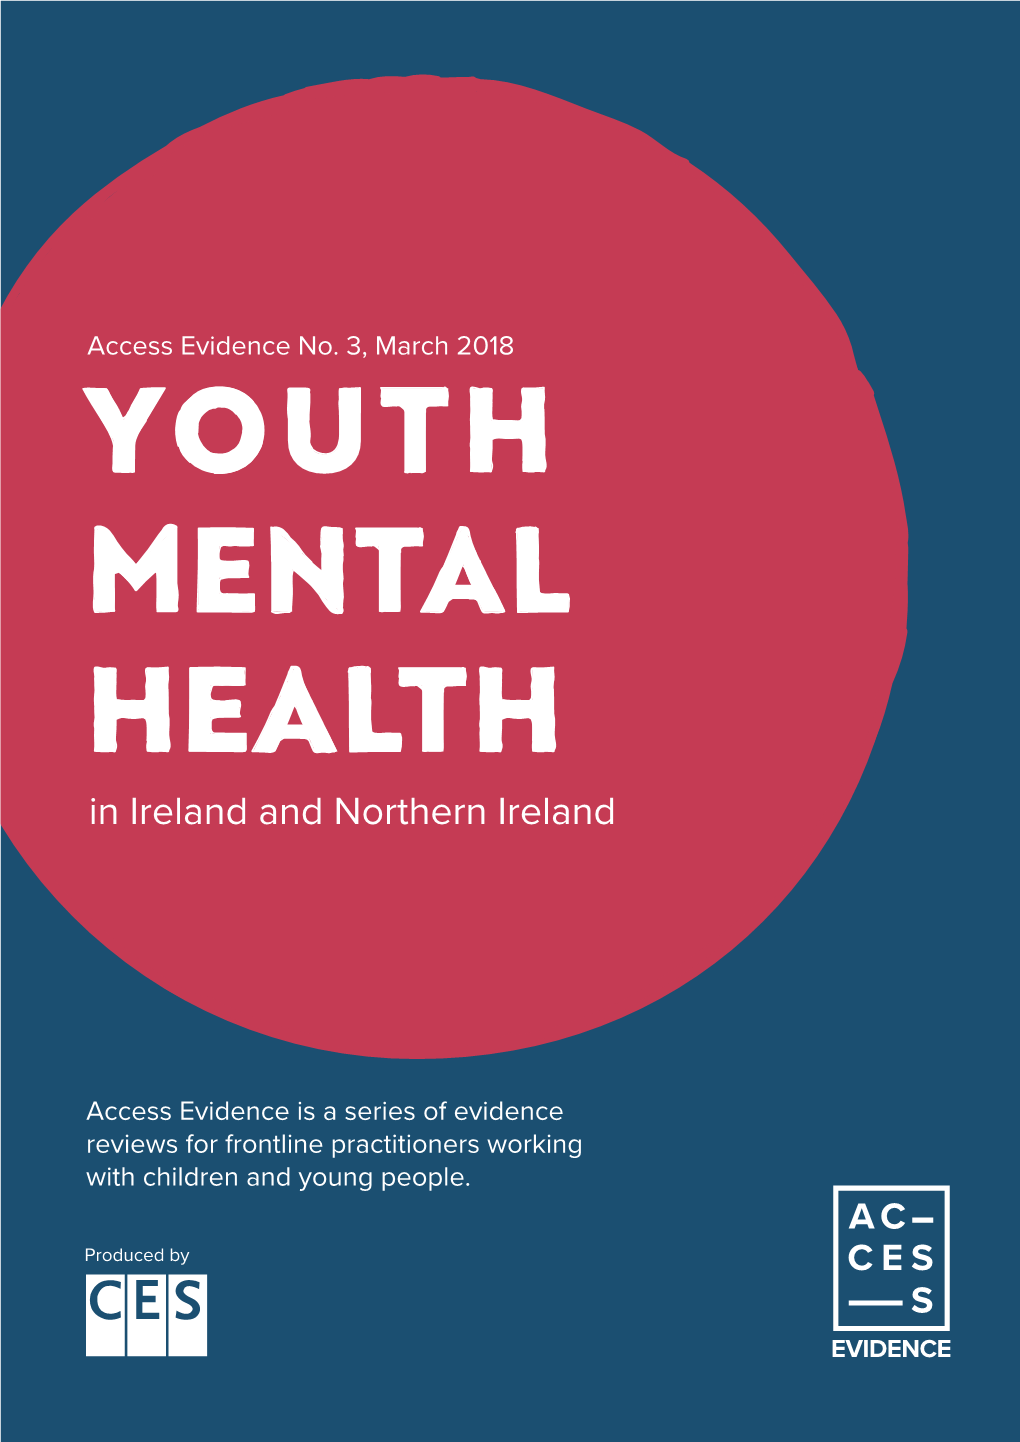 YOUTH MENTAL HEALTH in Ireland and Northern Ireland